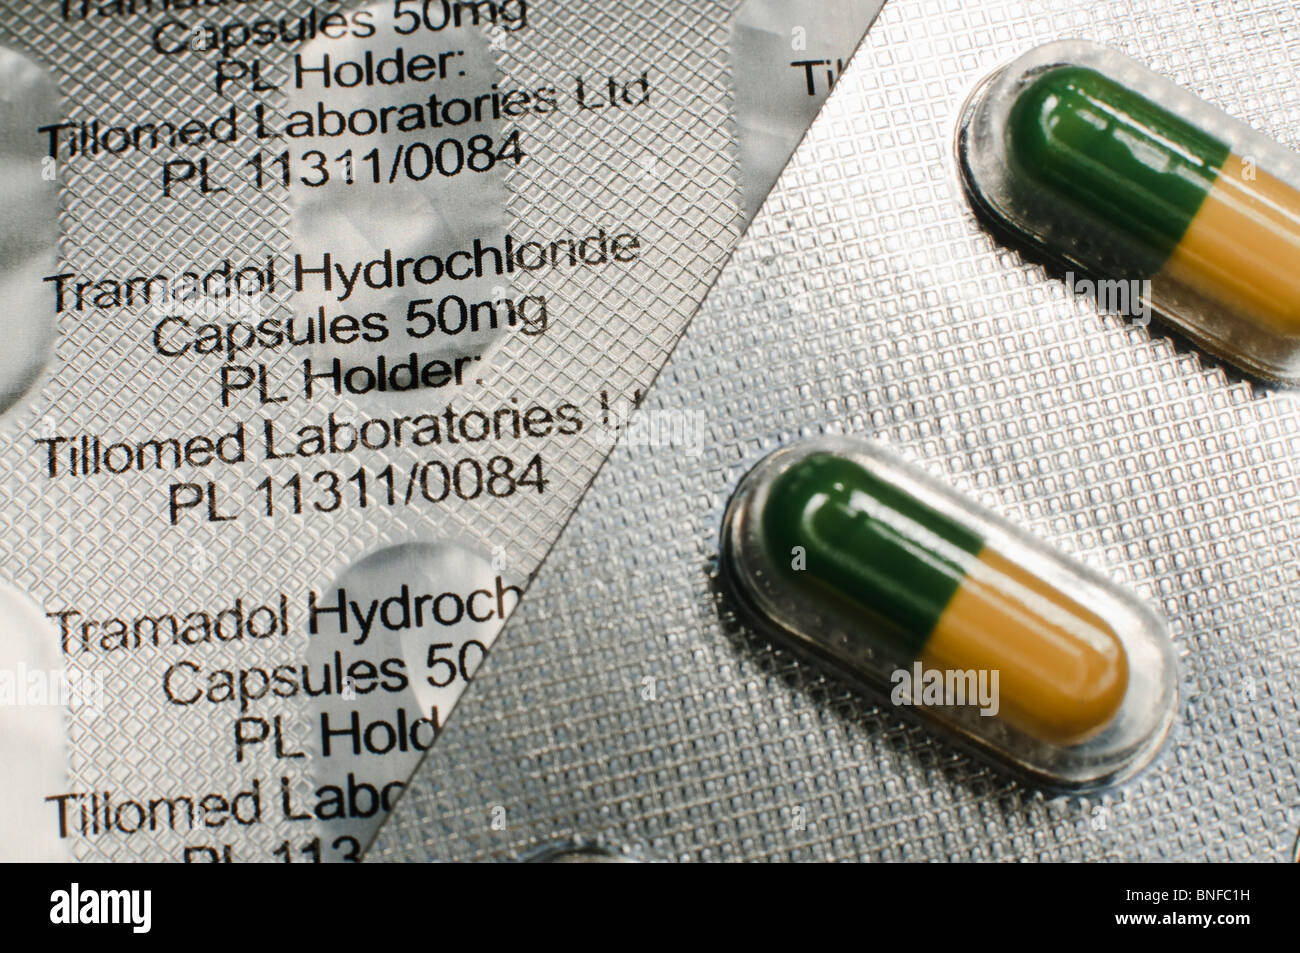 Blister pack of Tramadol Hydrochloride capsules, 50mg from Tillomed  Laboratories Ltd Stock Photo - Alamy